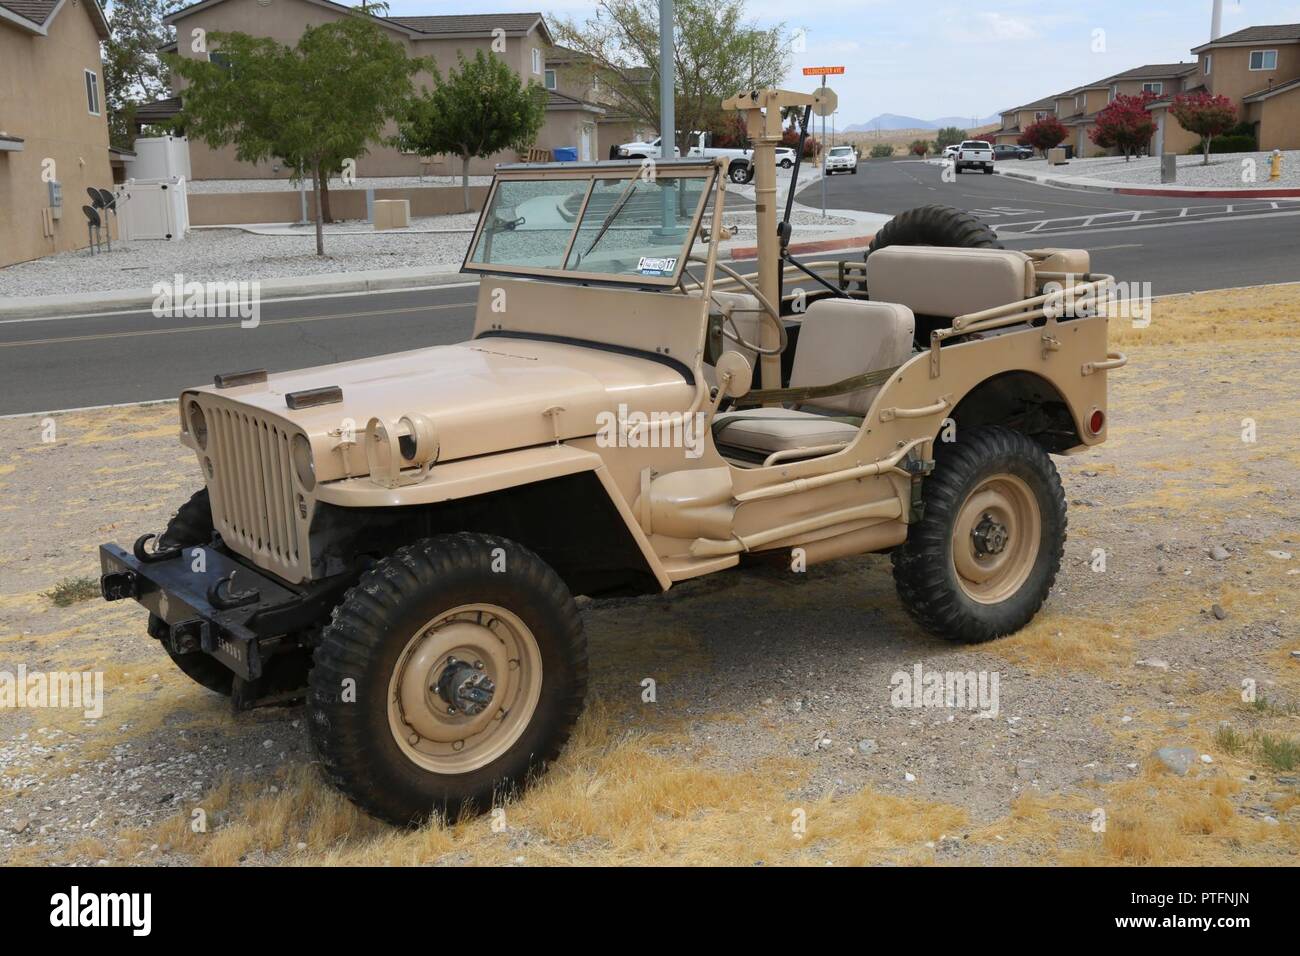 Arguably the most recognizable piece of military equipment from World War  II and beyond, the Jeep was manufactured by both the Willys-Overland Motor  Company and the Ford Motor Company, which is the